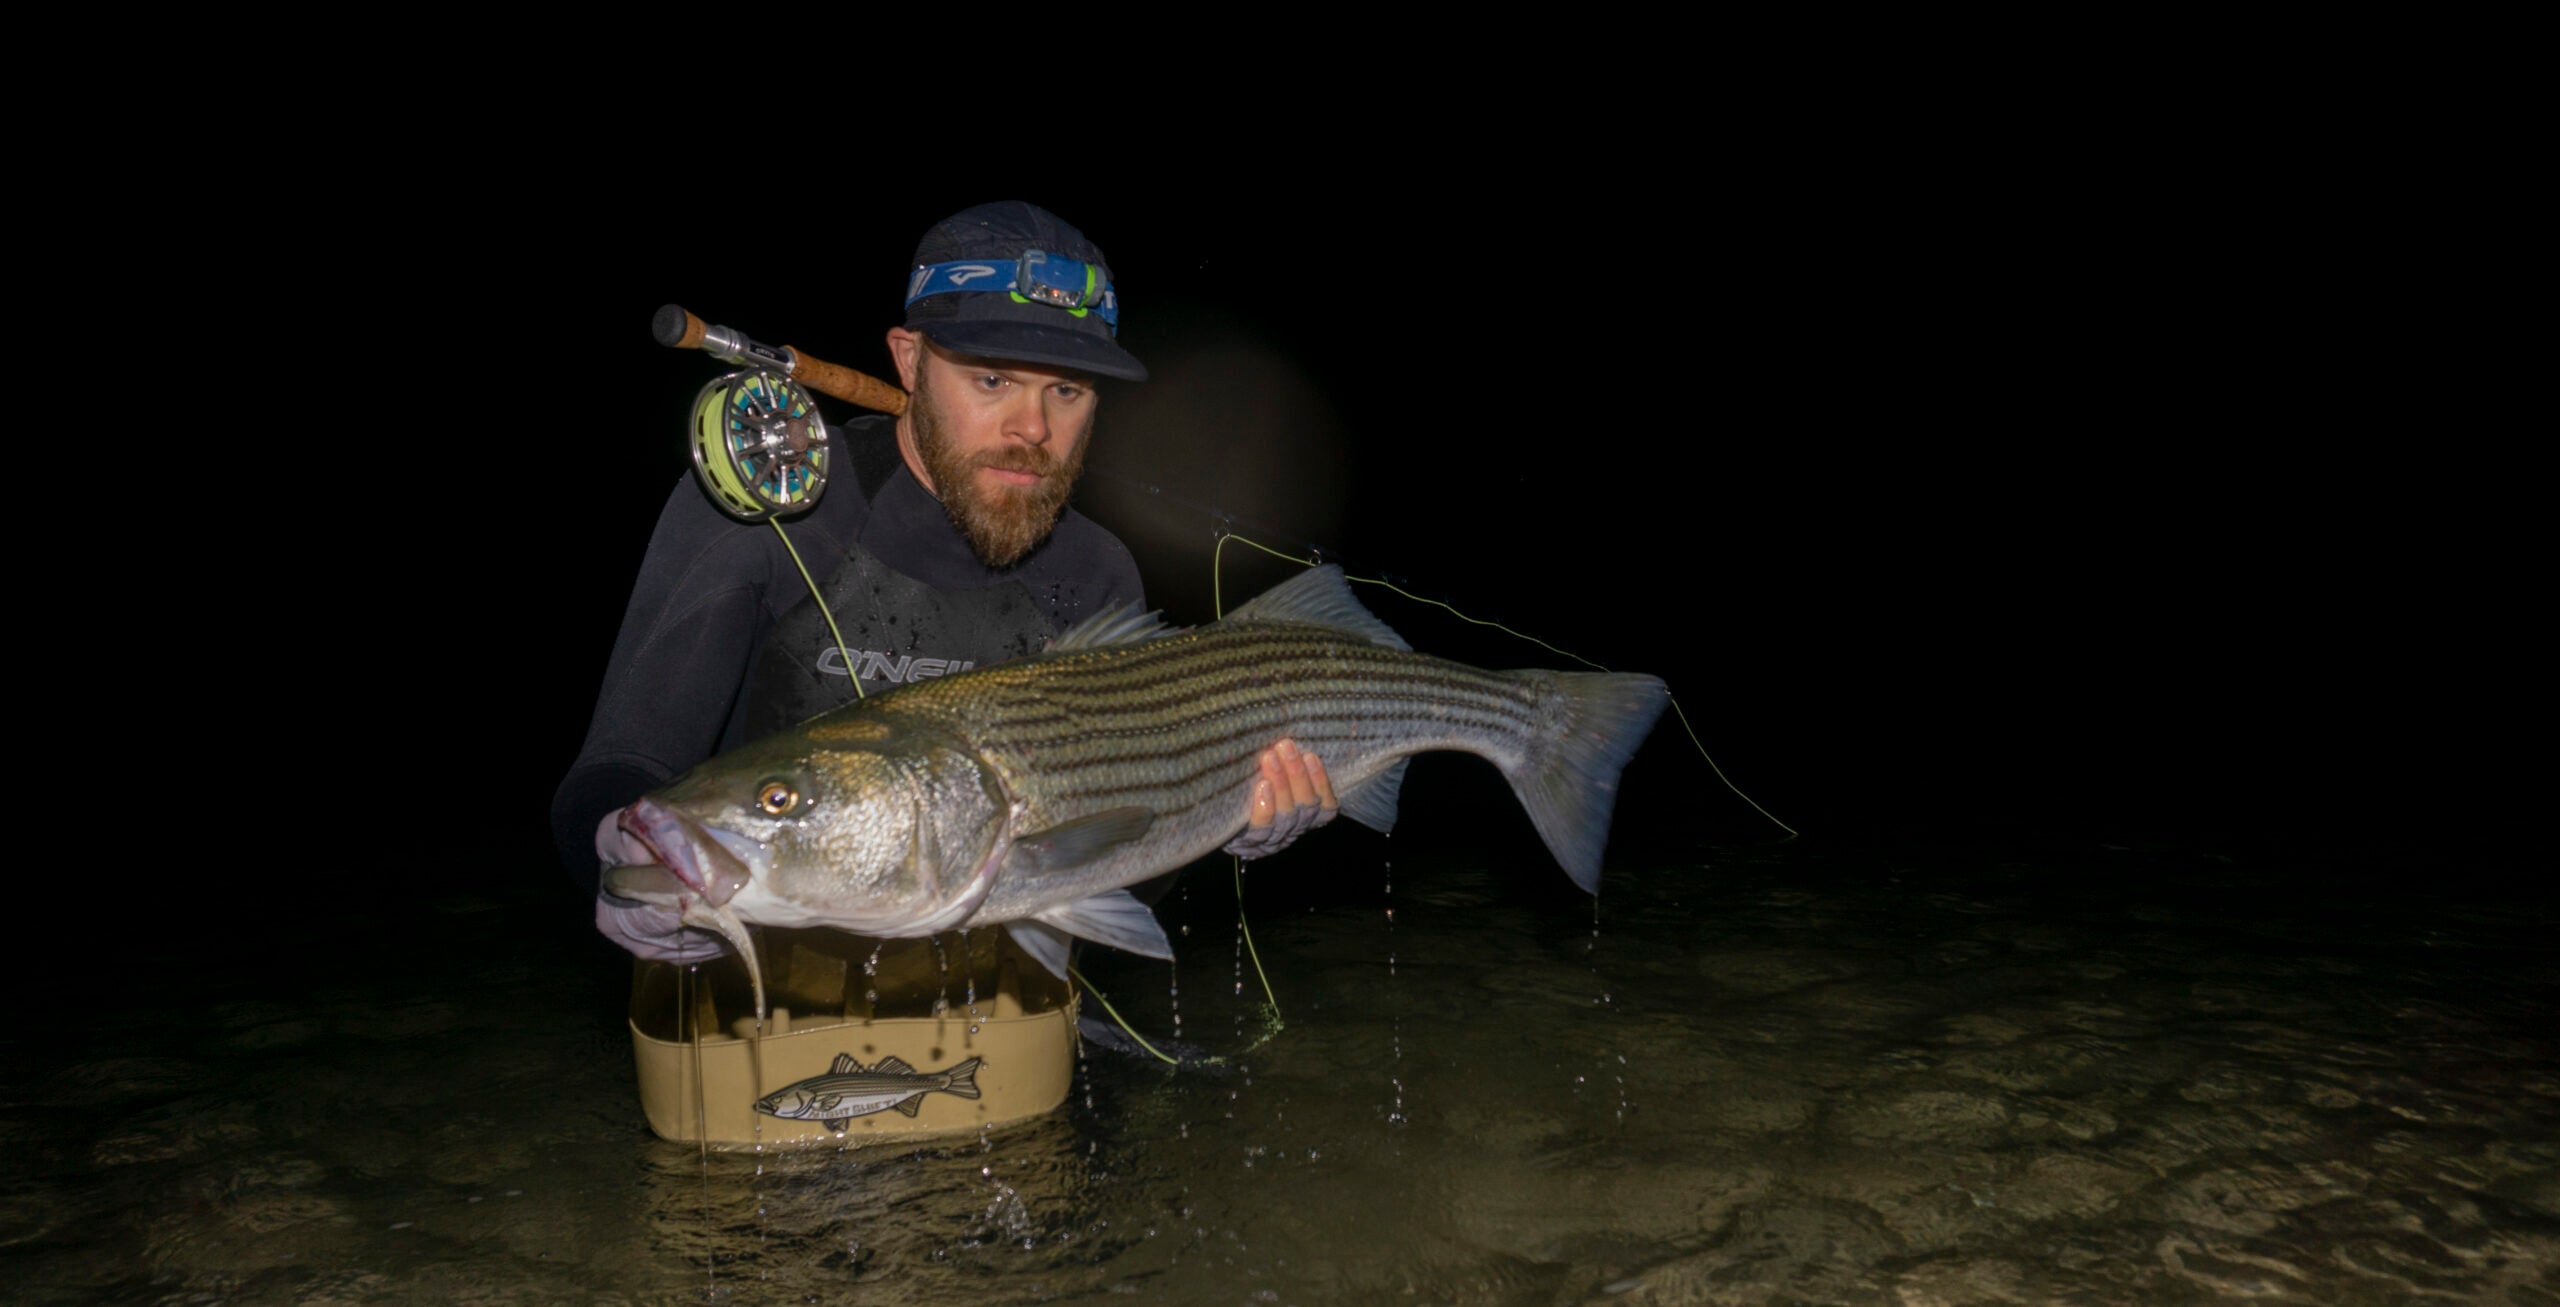 Fisherman with a striped bass at night.